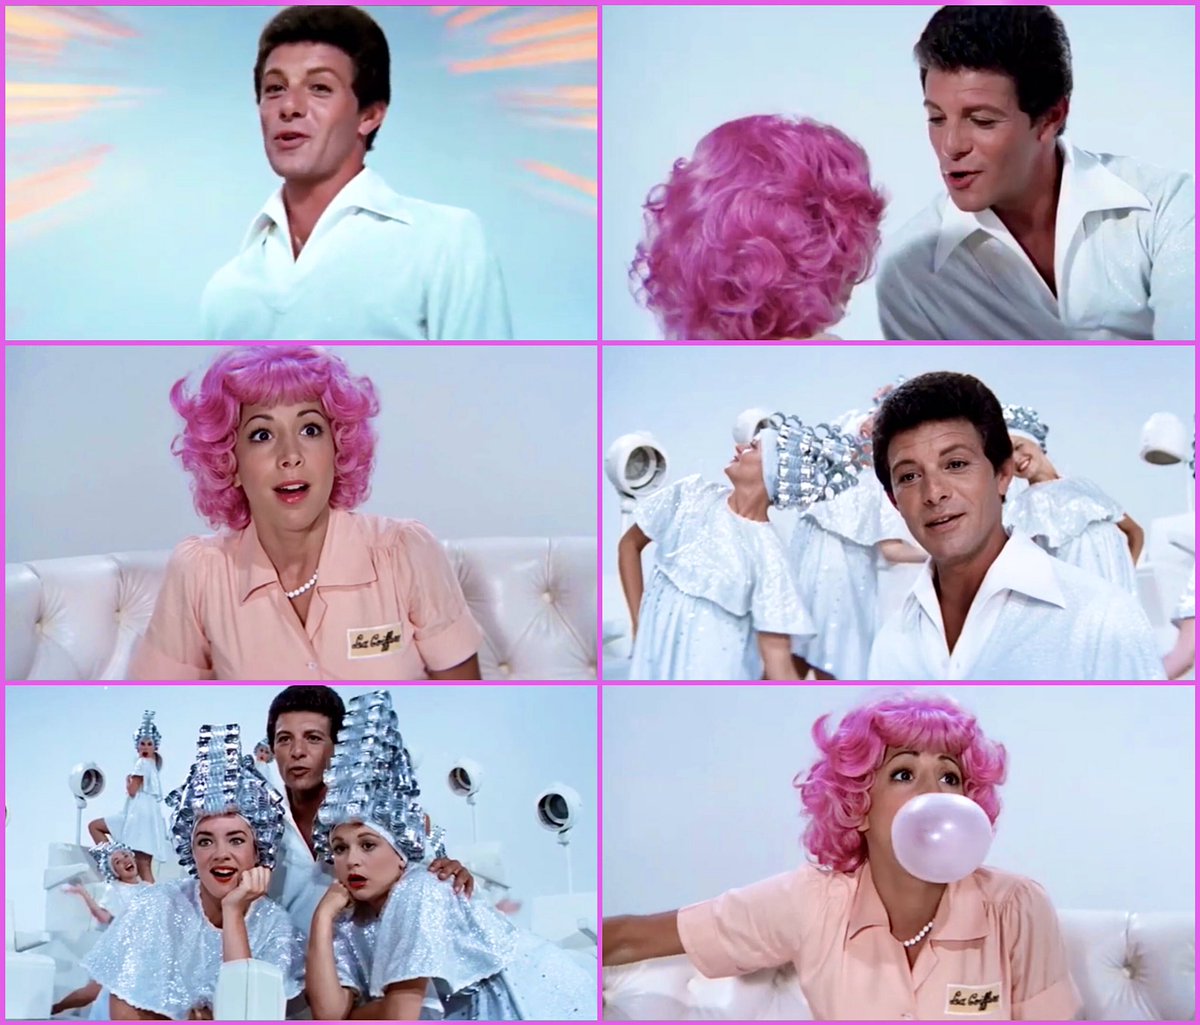 Happy Birthday to 🇺🇸American actor and singer #FrankieAvalon #BOTD in #Philadelphia #Pennsylvania, seen here as Teen Idol performing “Beauty School Dropout” with co-stars #DidiConn #StockardChanning & #DinahManoff in the musical romantic comedy “GREASE” (1978) dir.Randal Kleiser